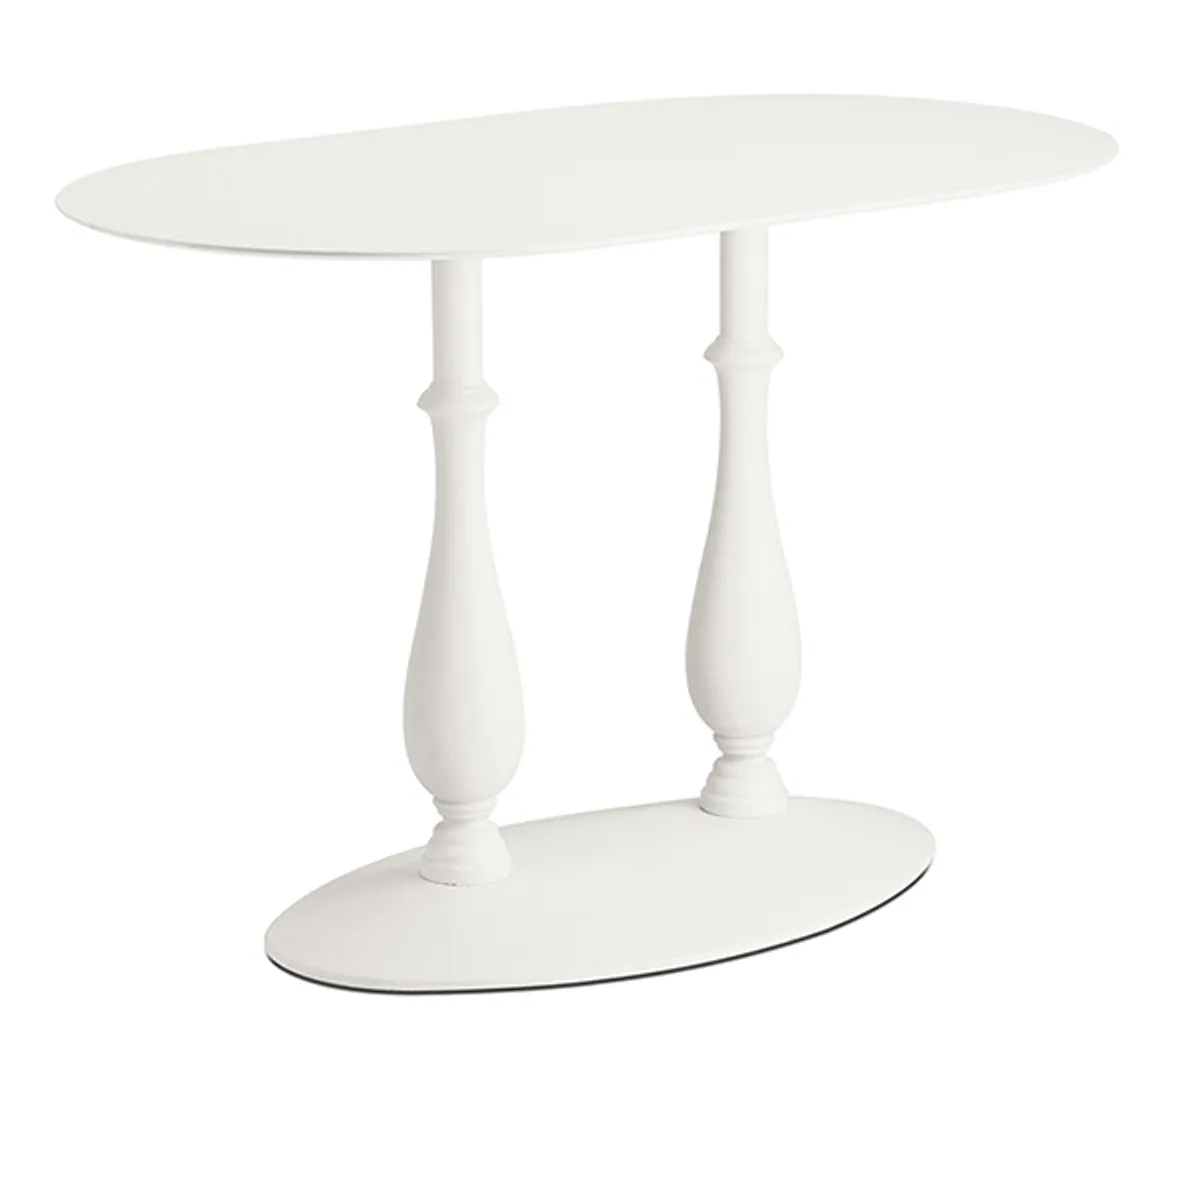 Liberty Twin Table Base White Castiron Inside Out Contracts